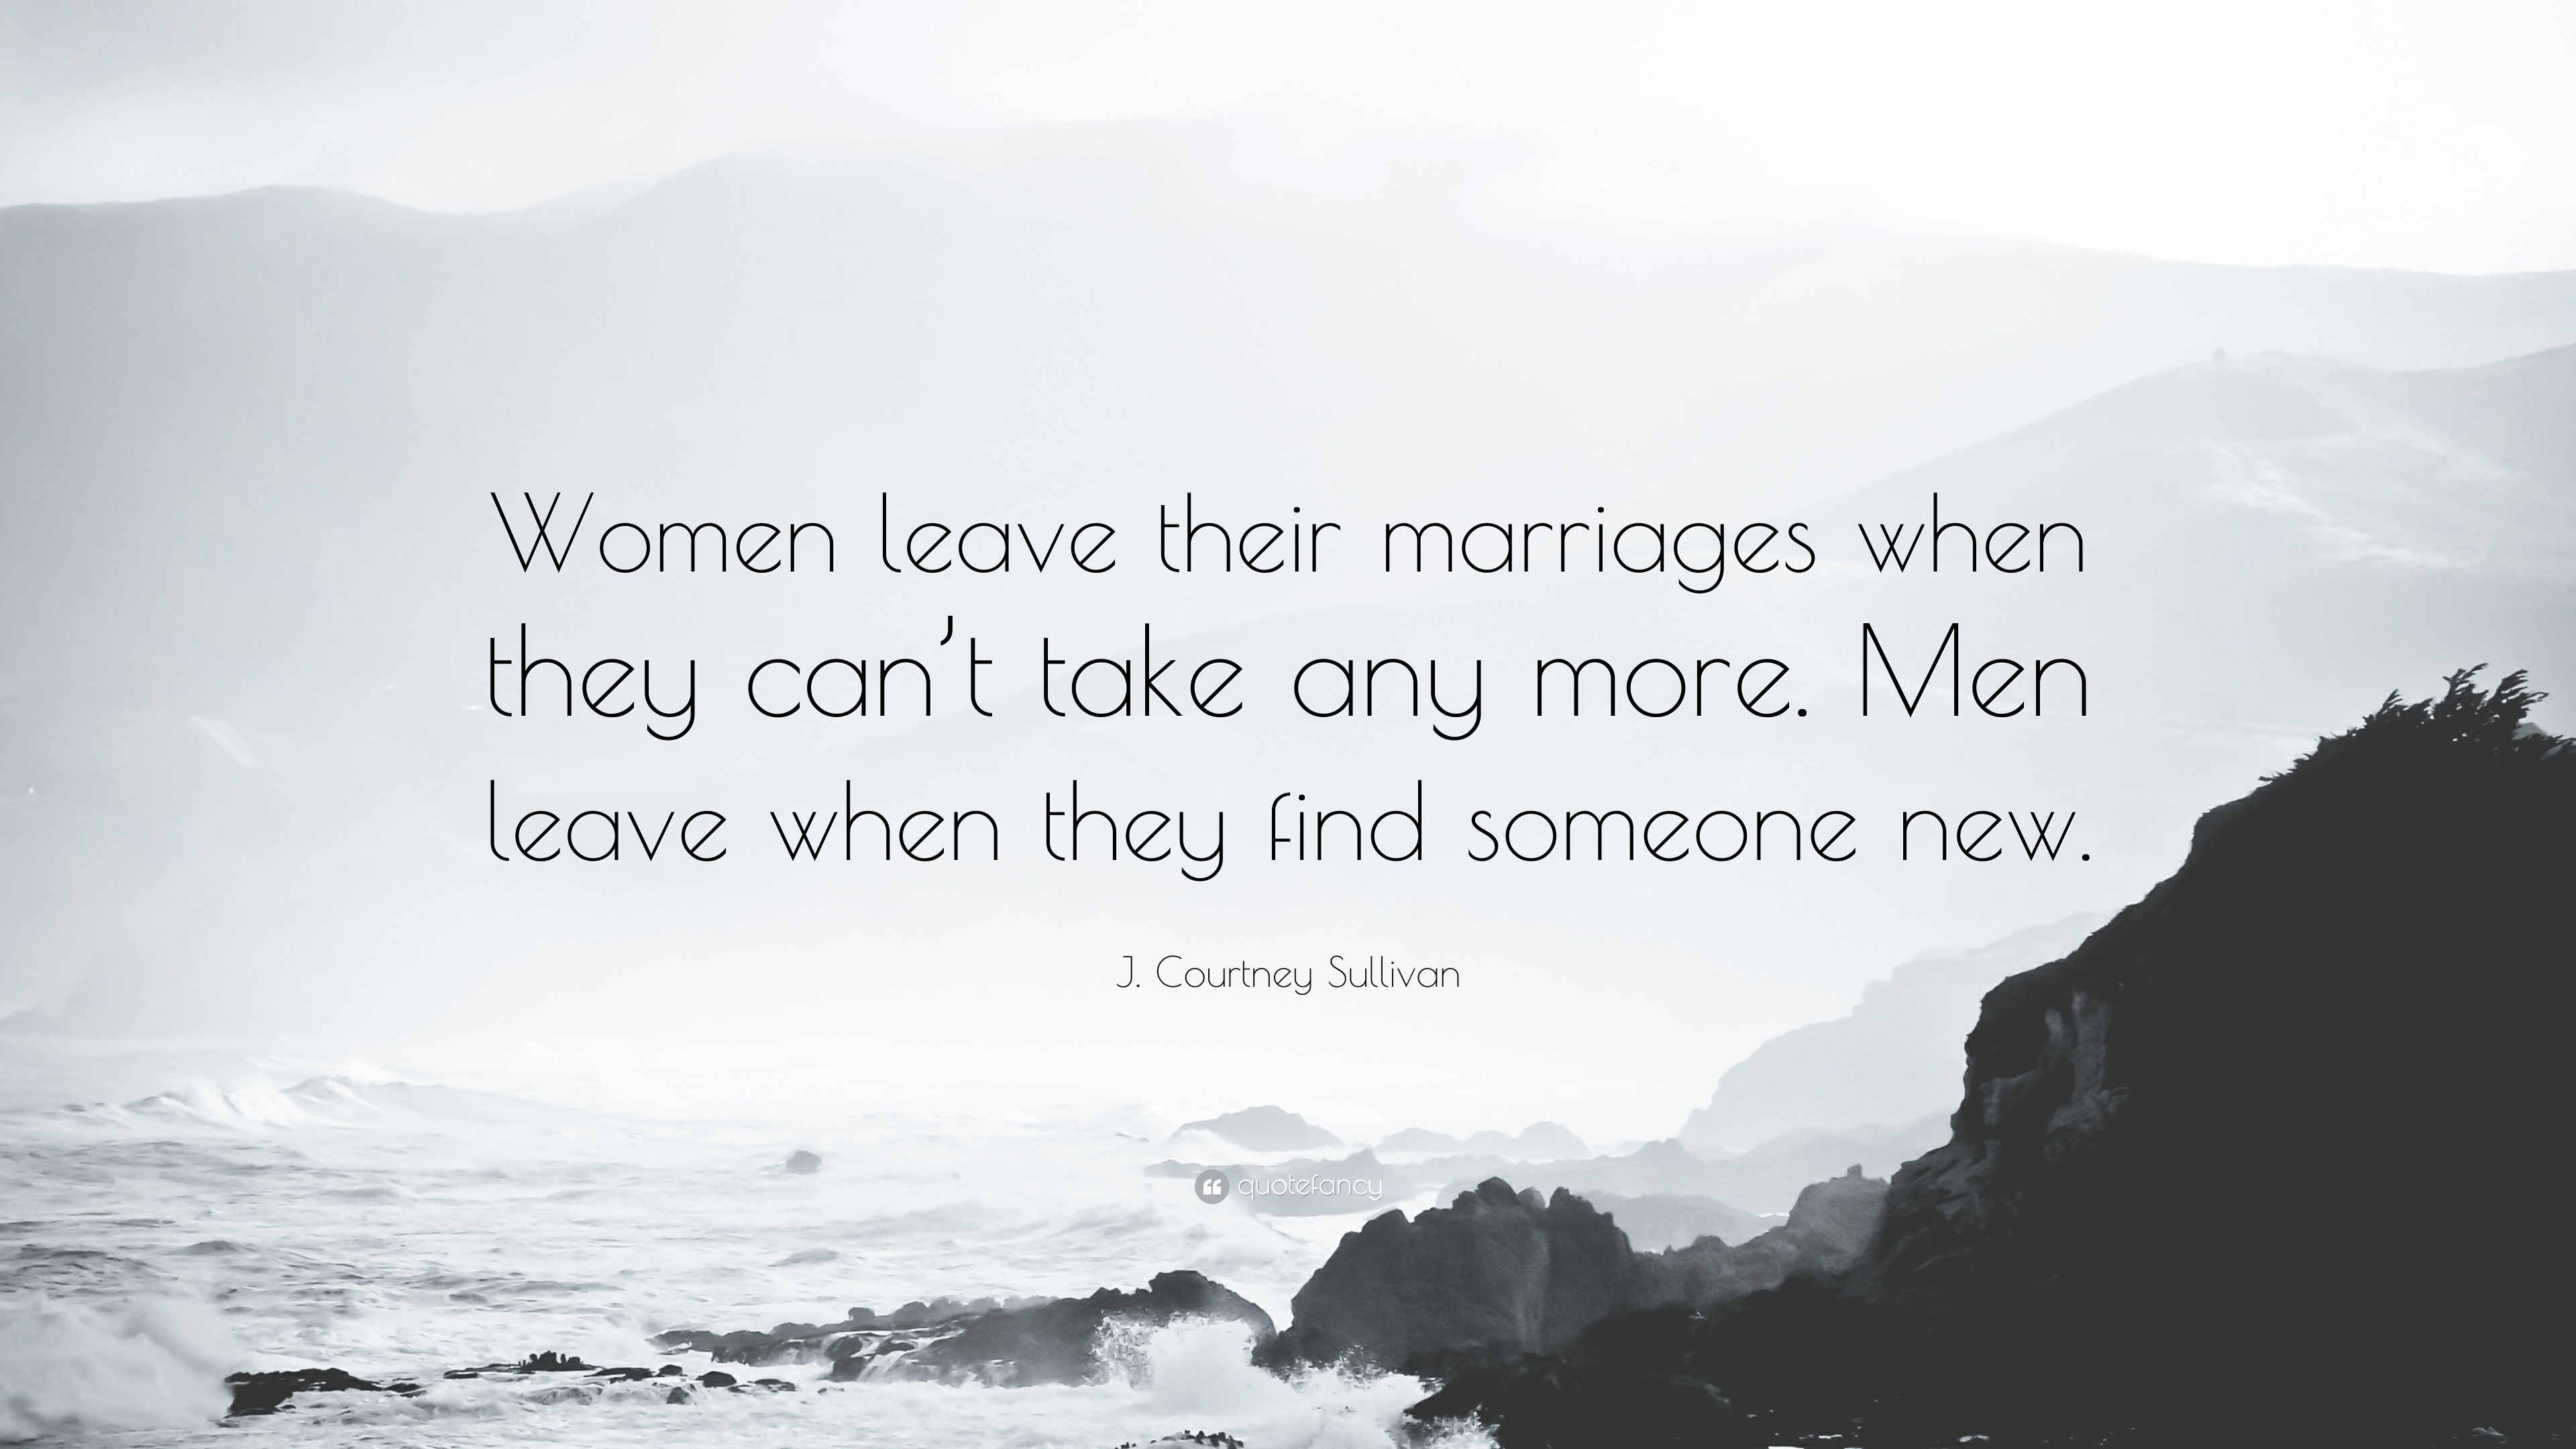 Leave marriages women why Why are